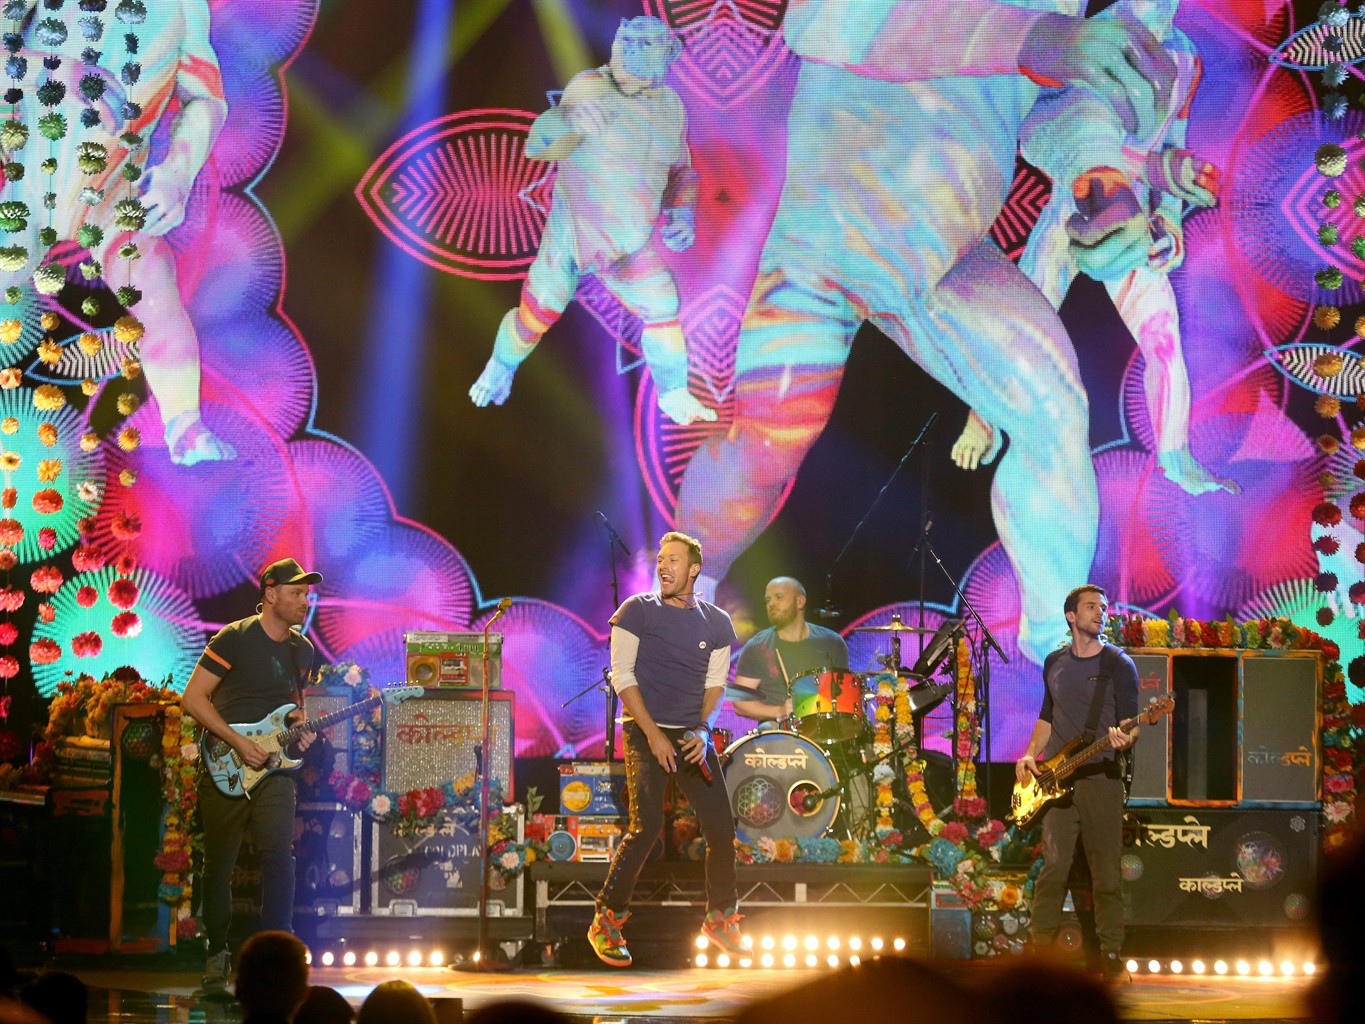 coldplay 2015 tour support act